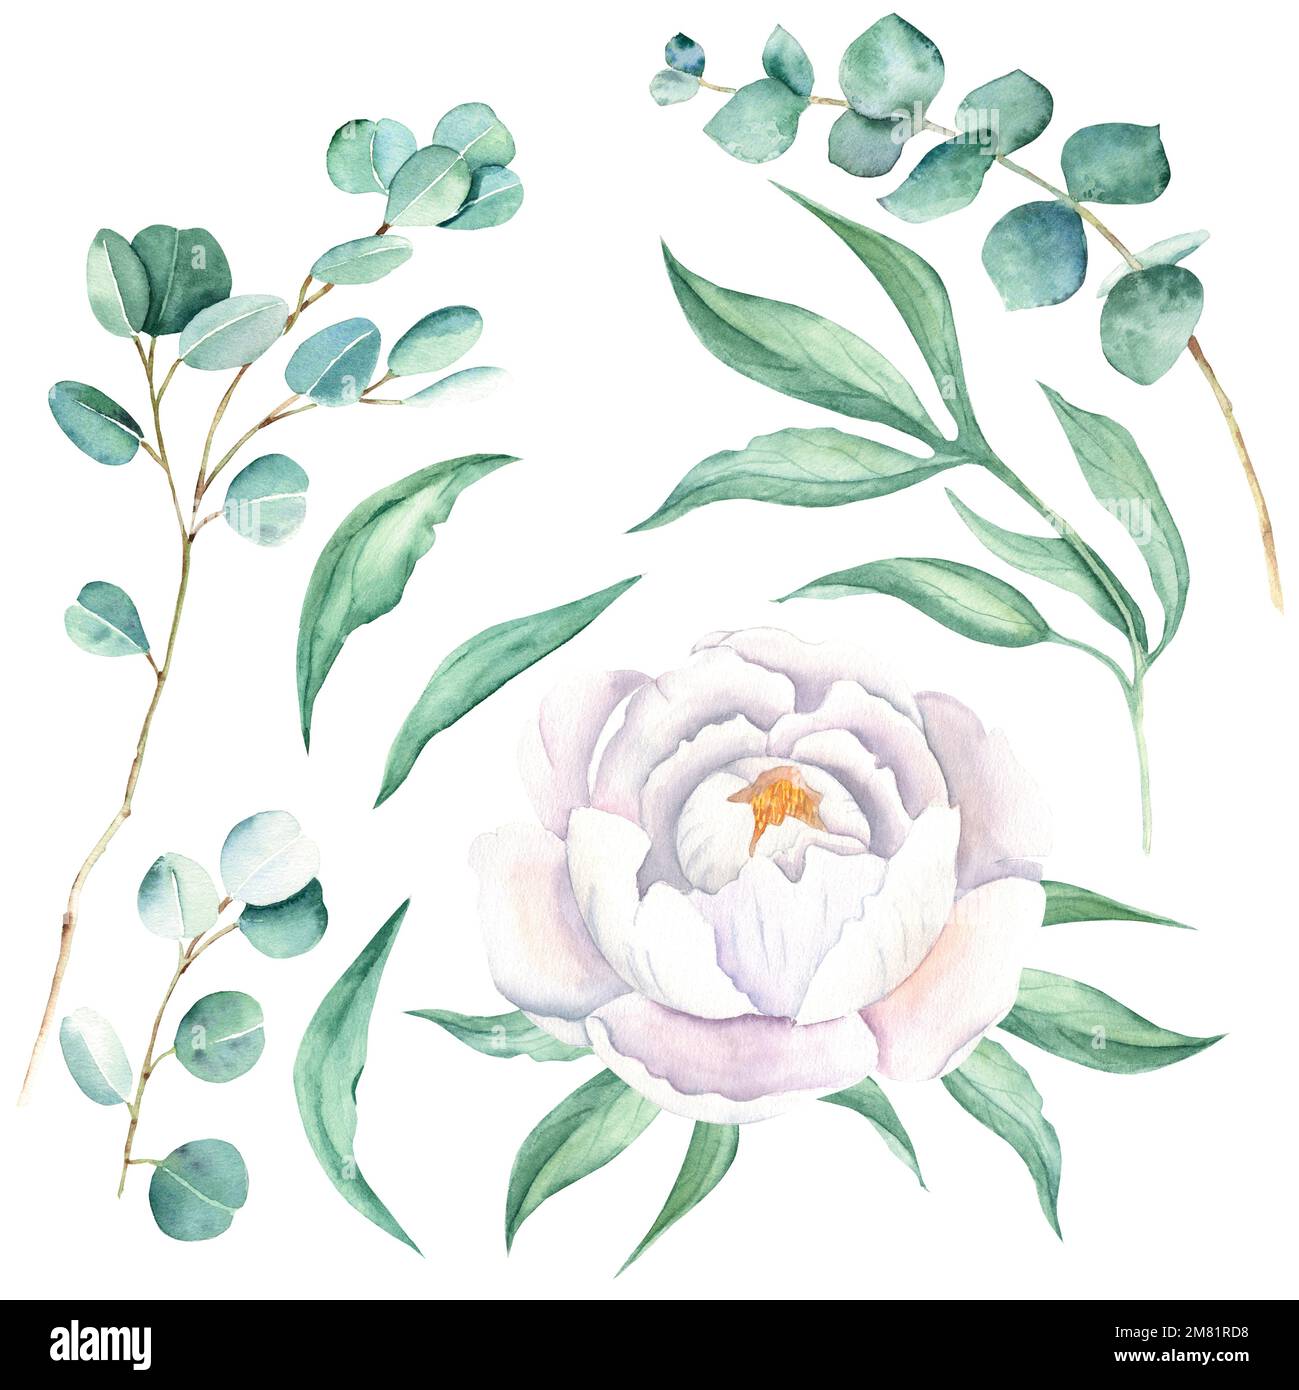 White watercolor peony flower, leaves and eucalyptus branches. Hand drawn botanical illustration isolated on white background. Can be used for Stock Photo